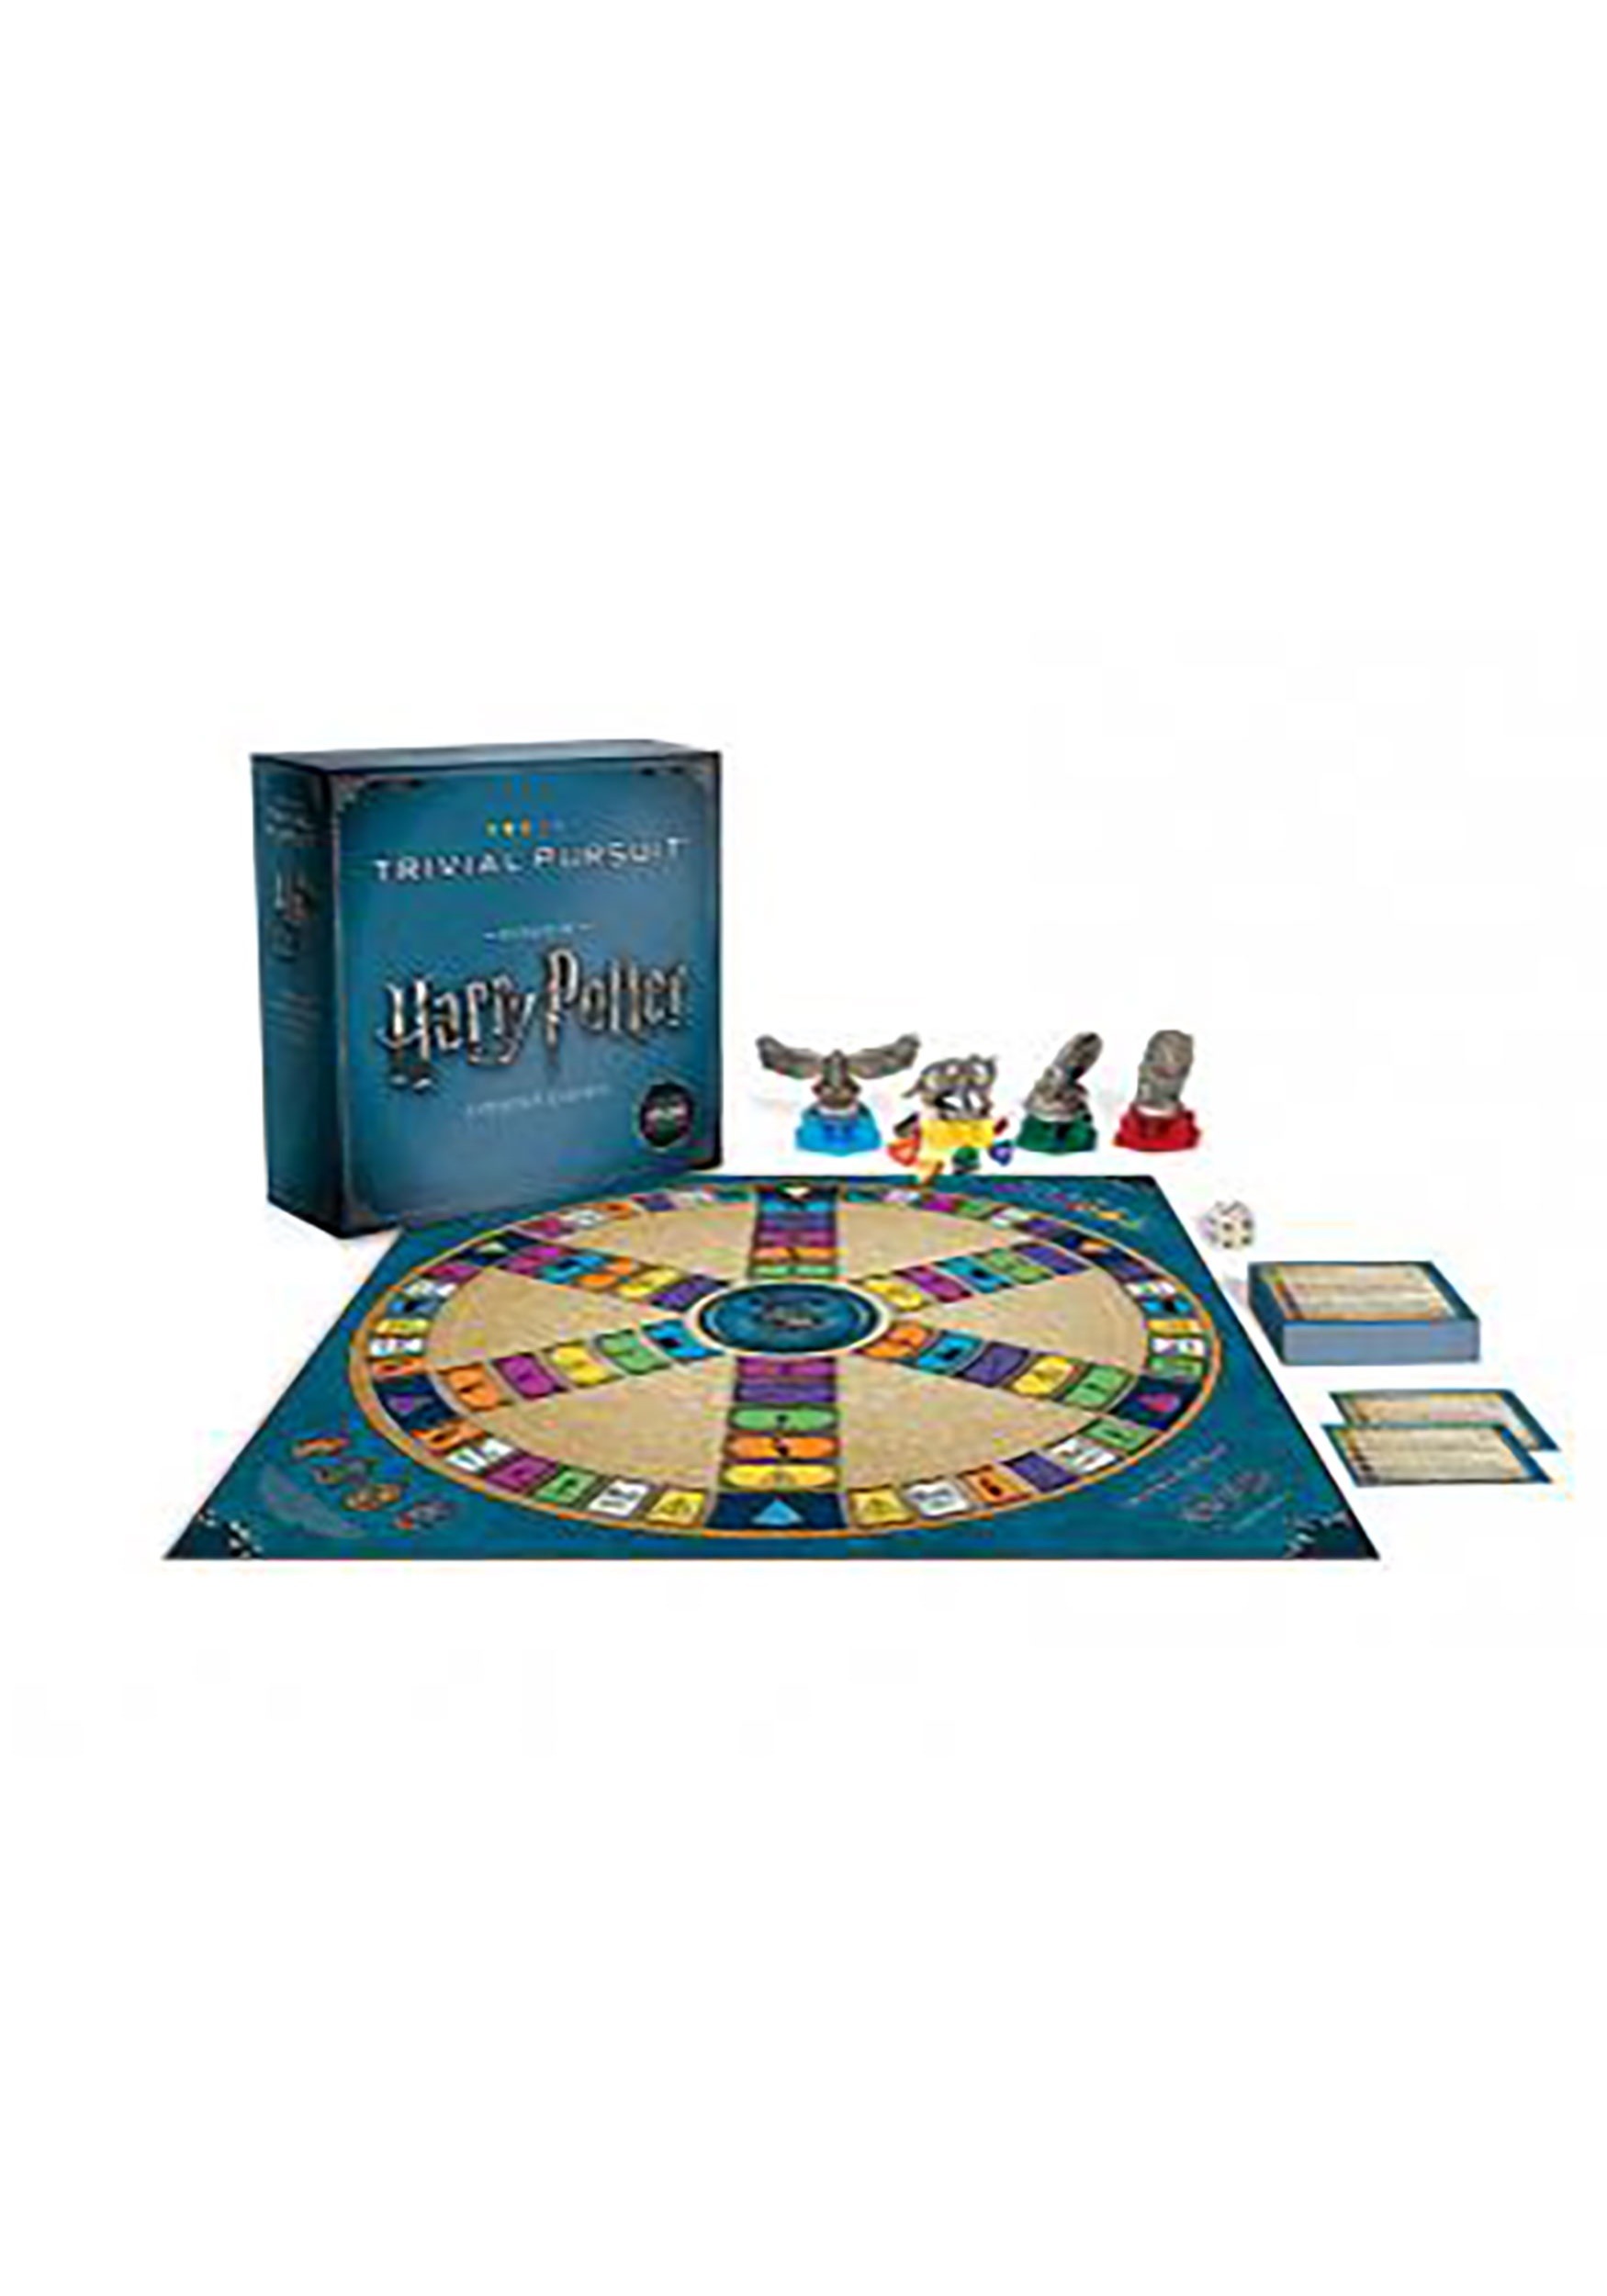 Trivial Pursuit World of Harry Potter Ultimate Edition Board Game